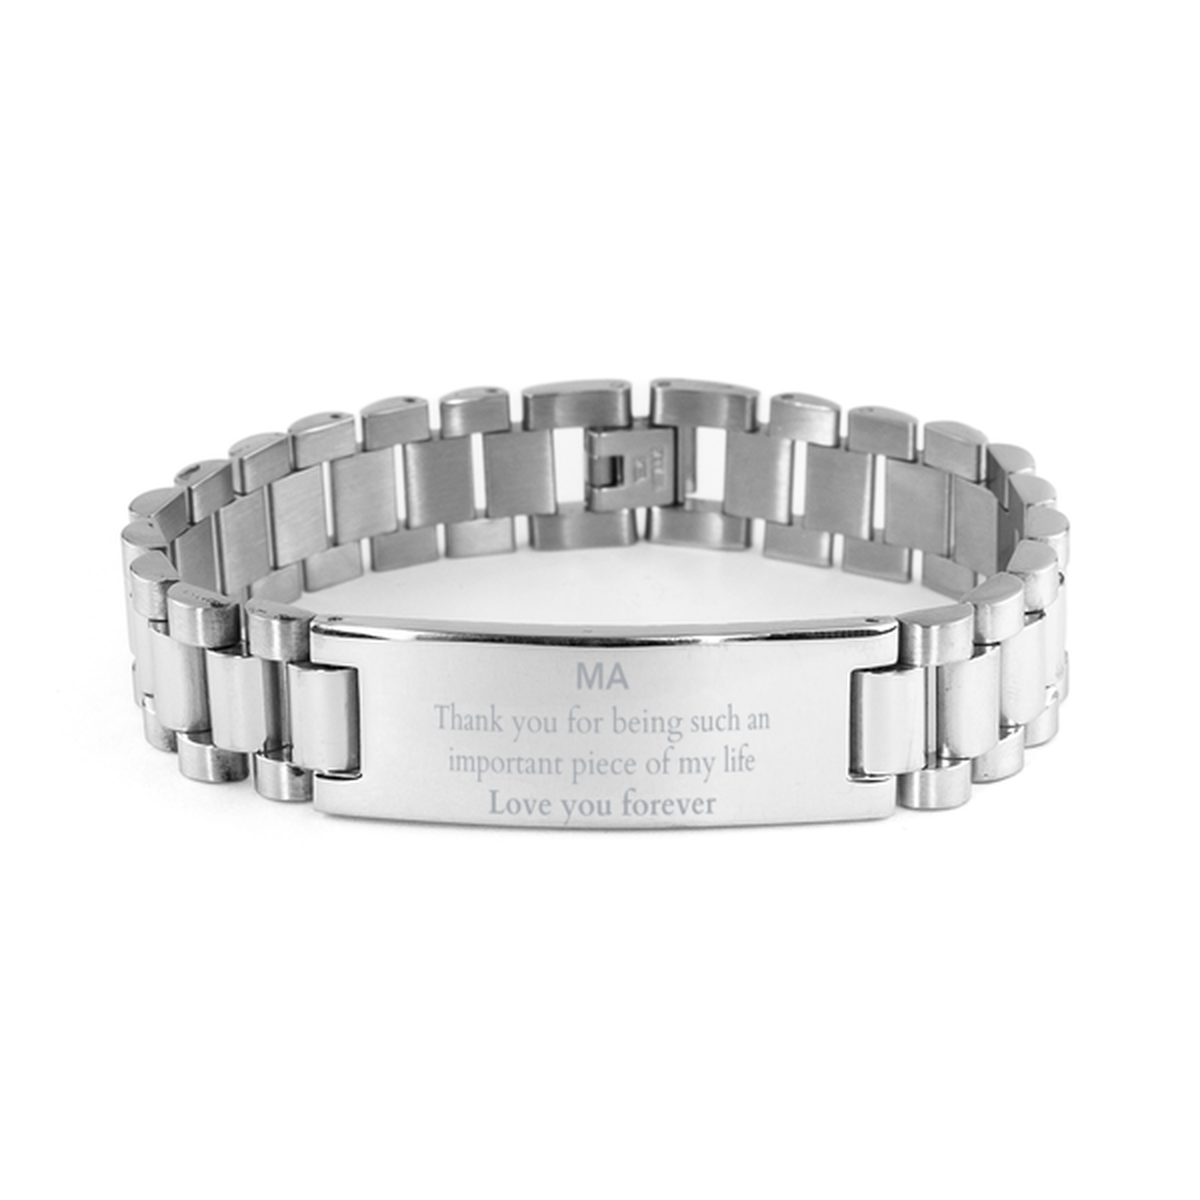 Appropriate Ma Ladder Stainless Steel Bracelet Epic Birthday Gifts for Ma Thank you for being such an important piece of my life Ma Christmas Mothers Fathers Day